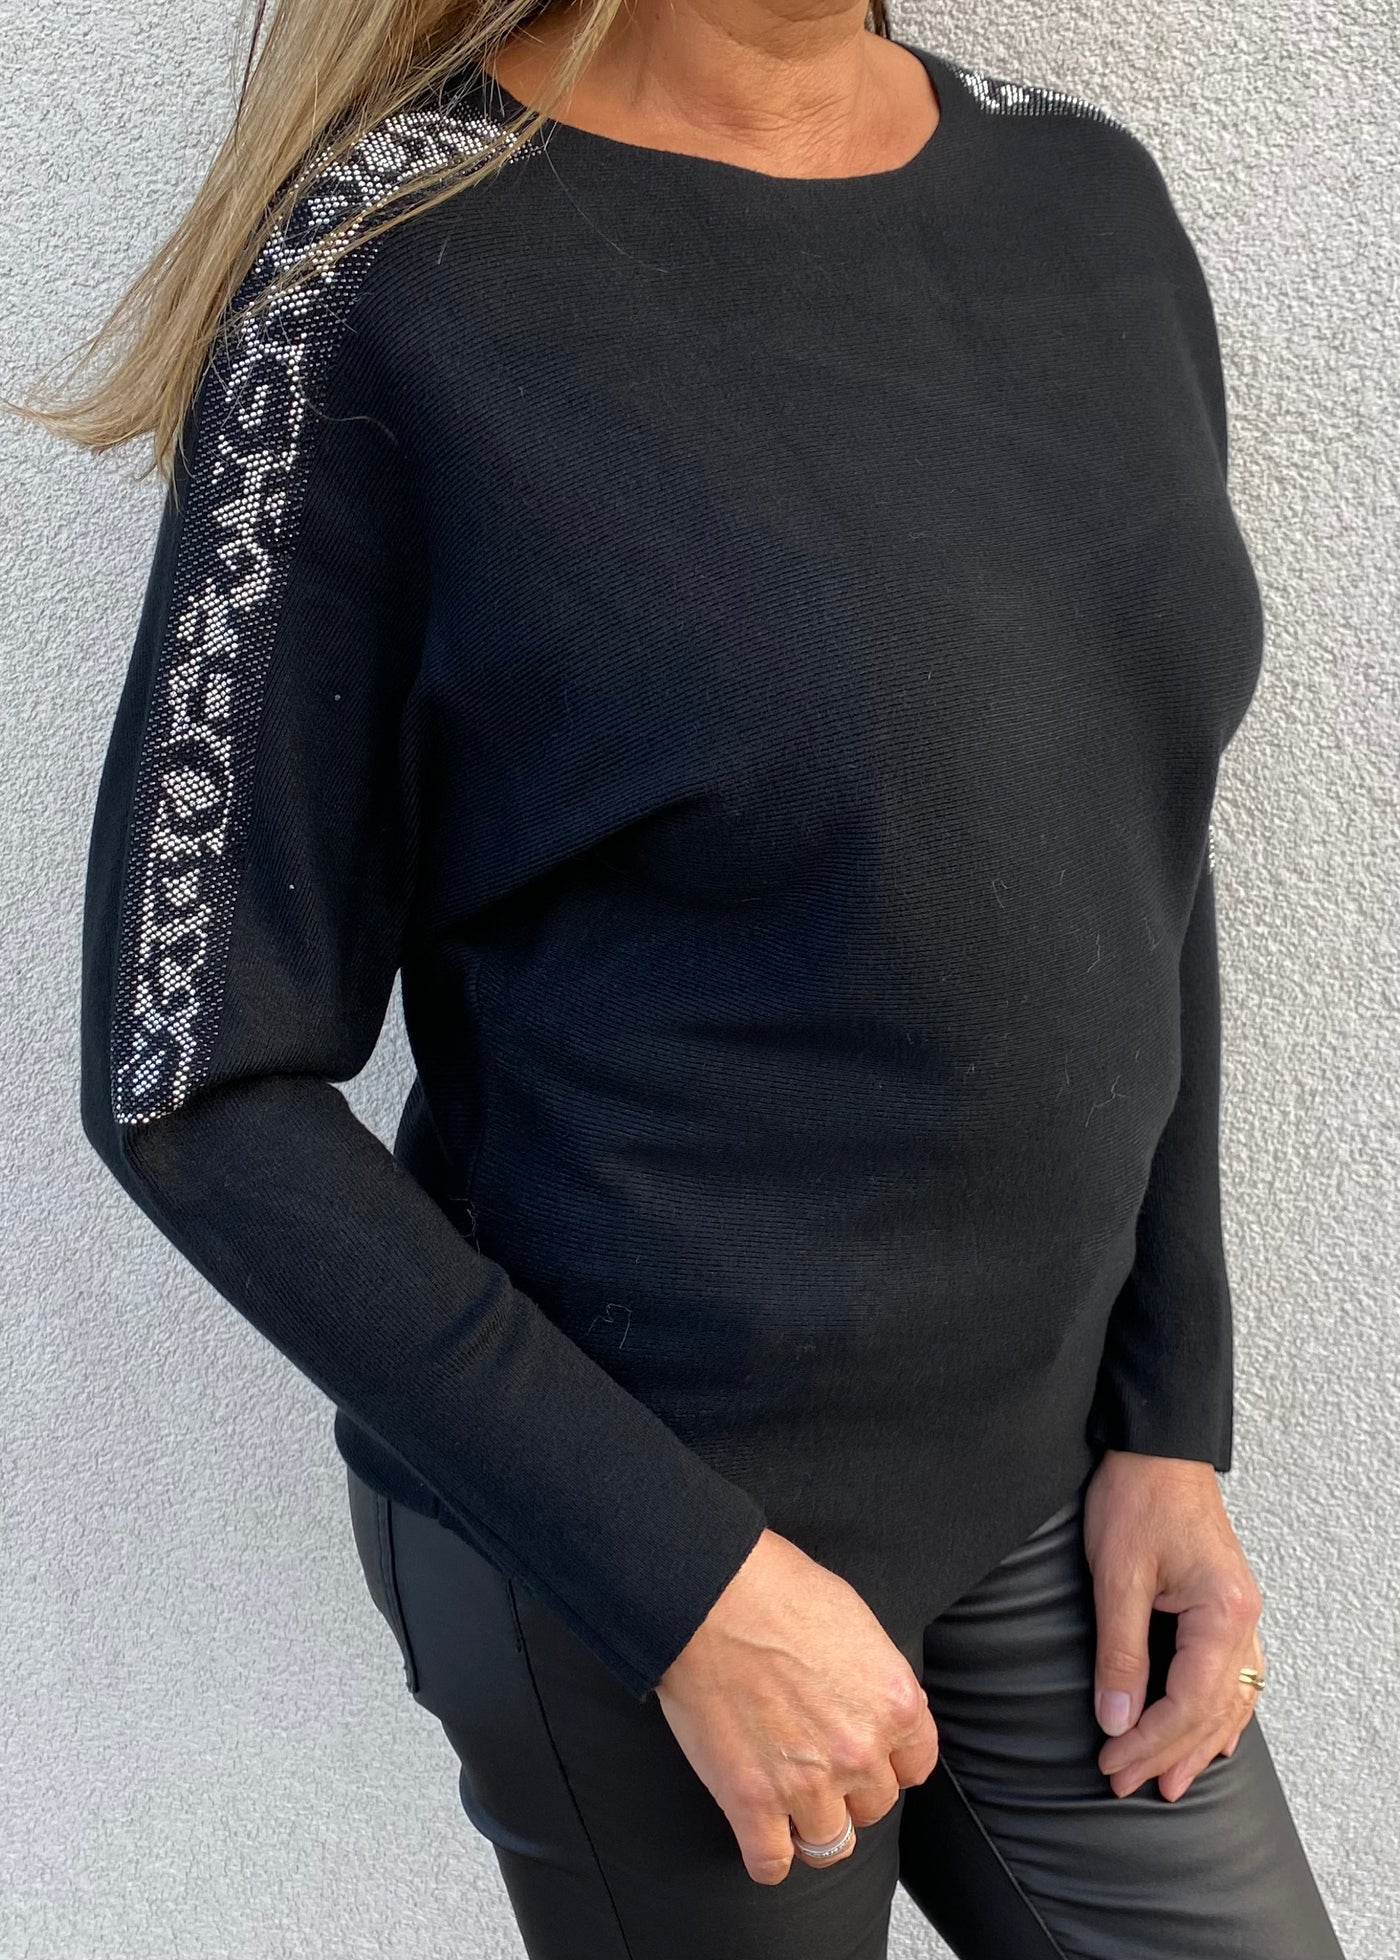 Black Batwing Top with Sparkle Trim